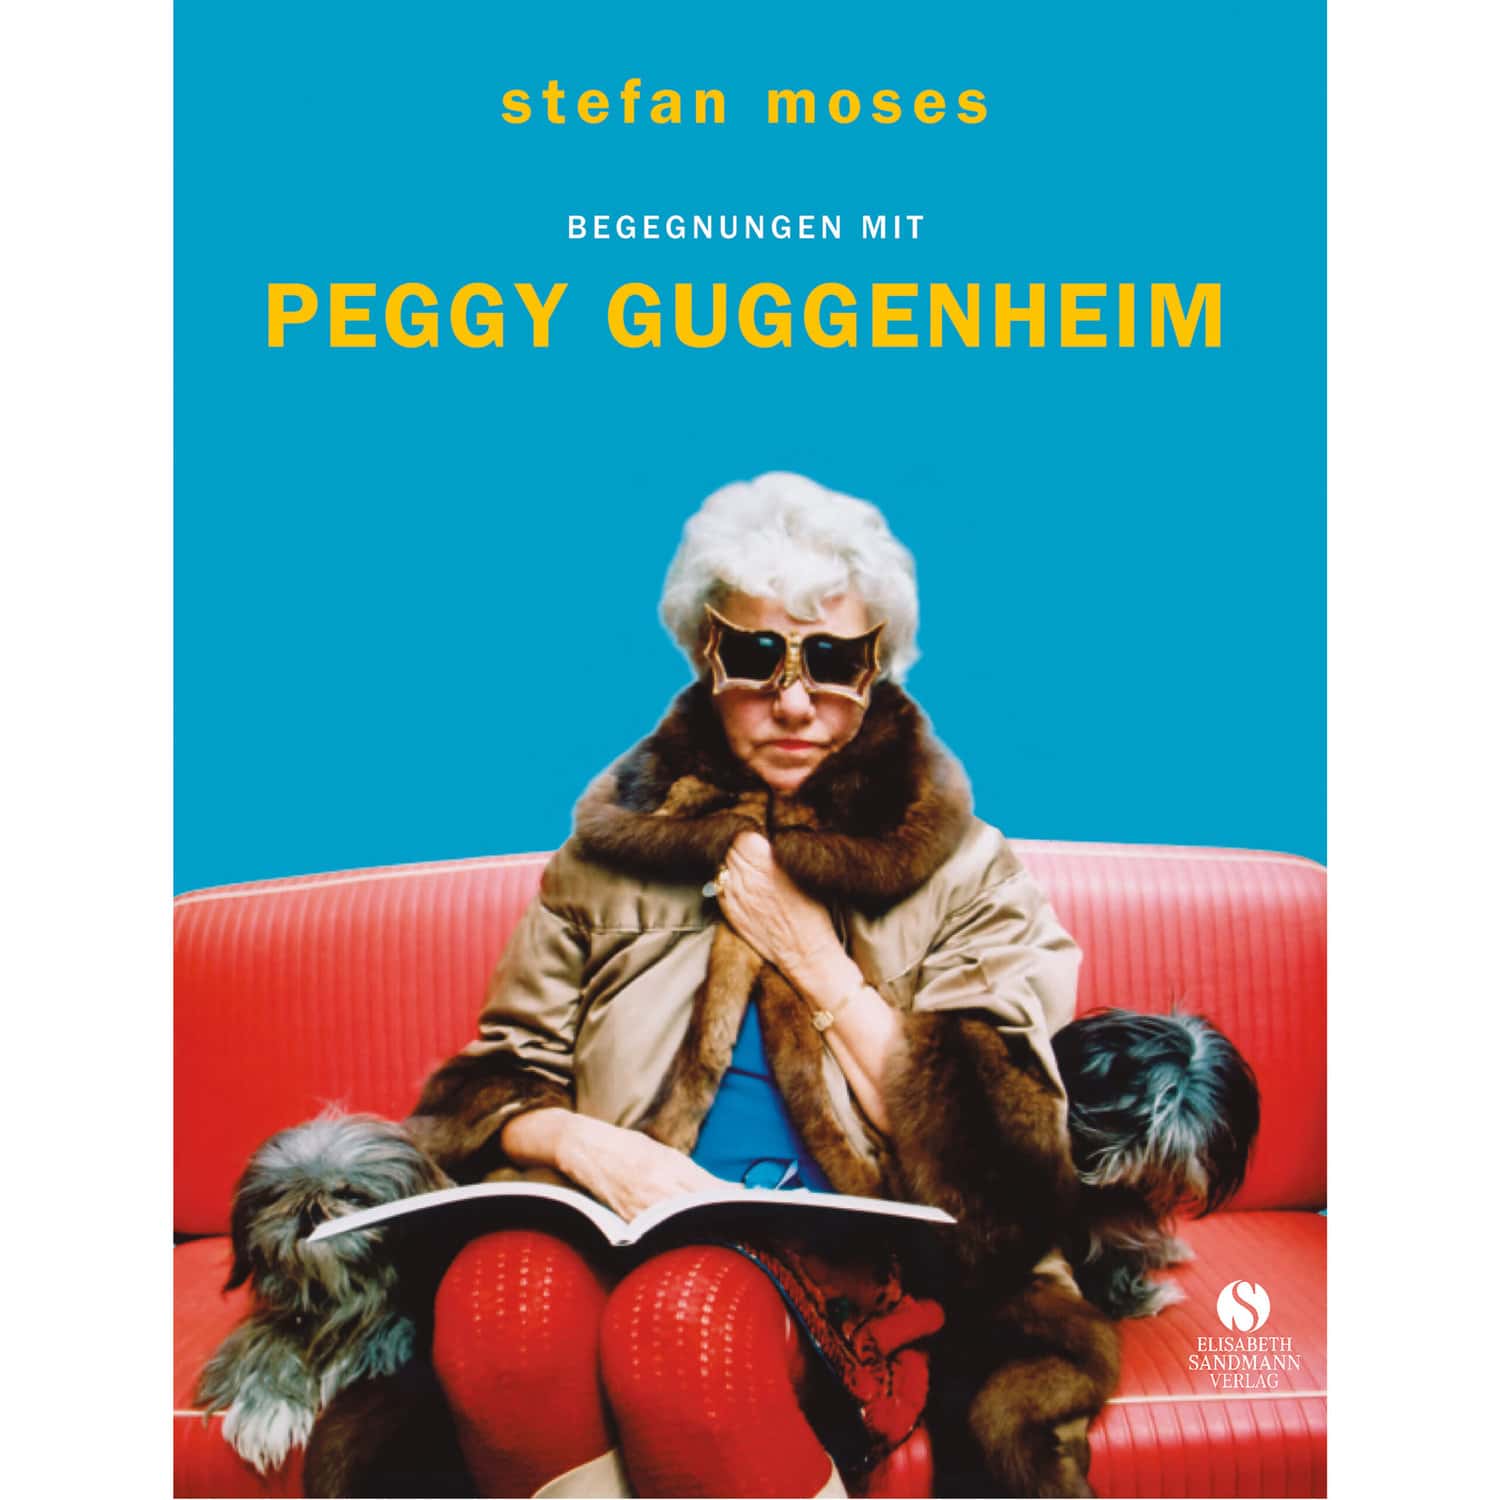 STEFAN MOSES ENCOUNTERS WITH PEGGY GUGGENHEIM